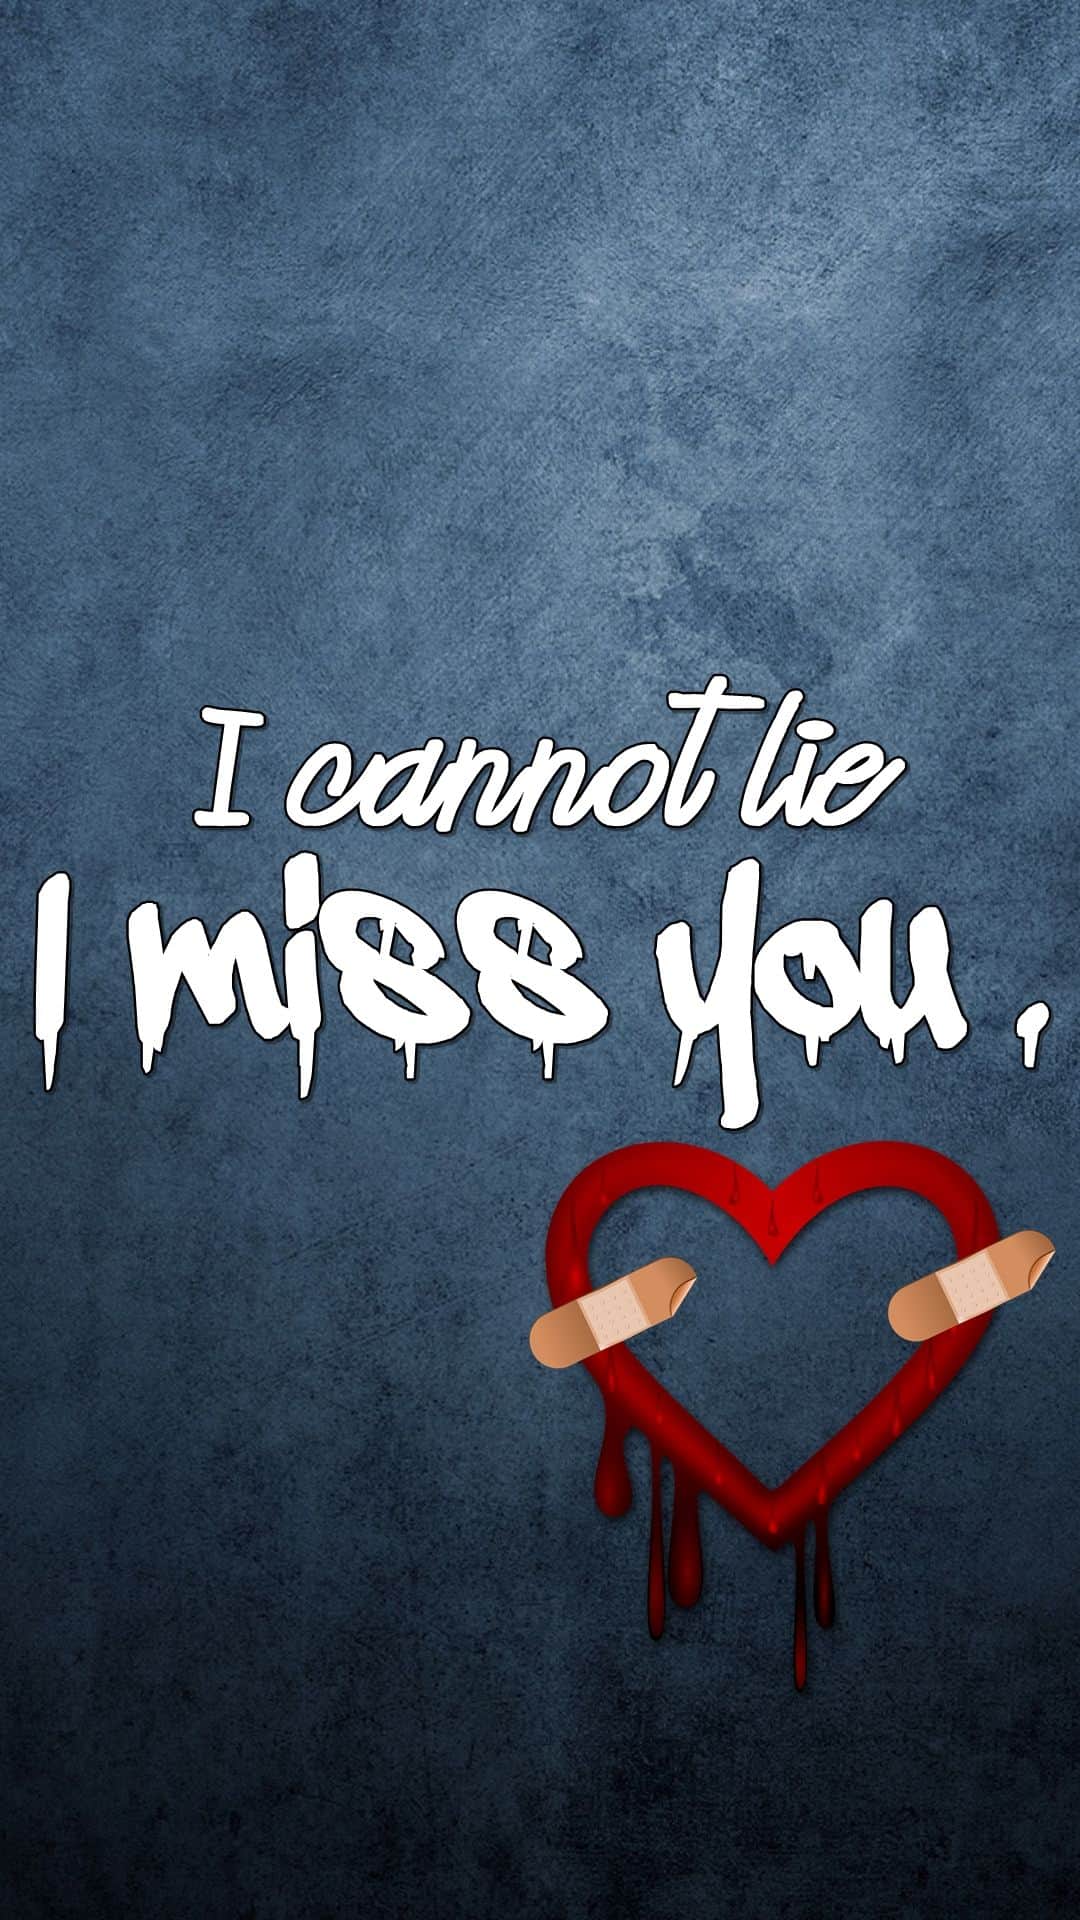 I Miss You Images HD